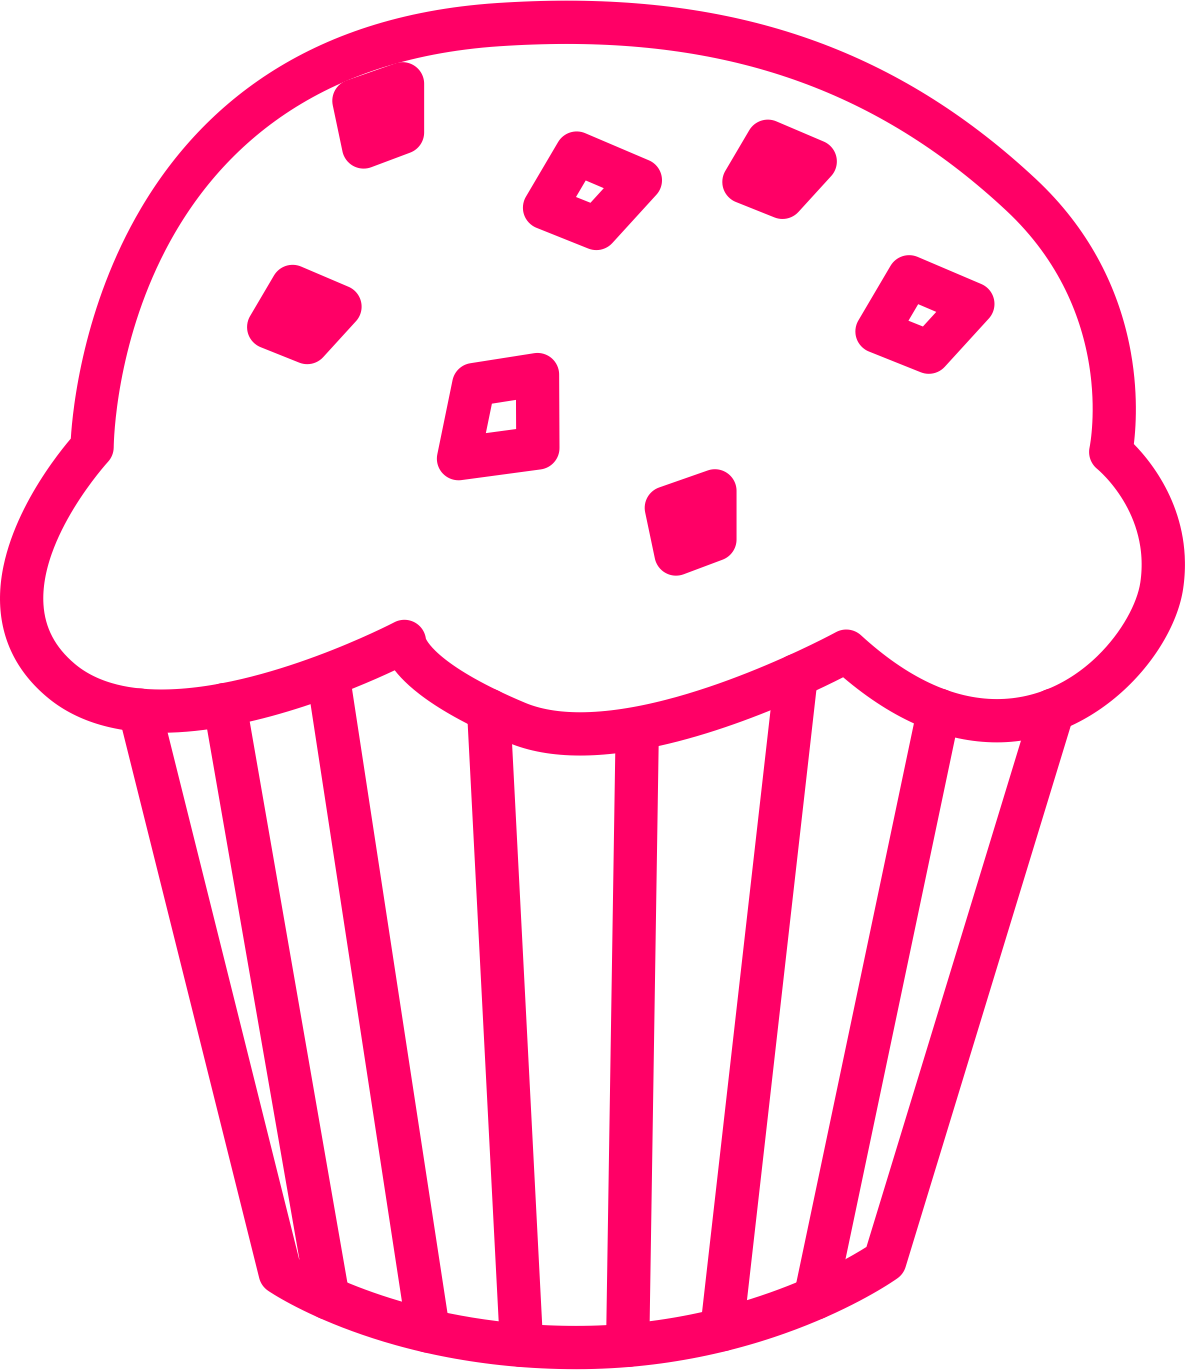 Cup Cake 